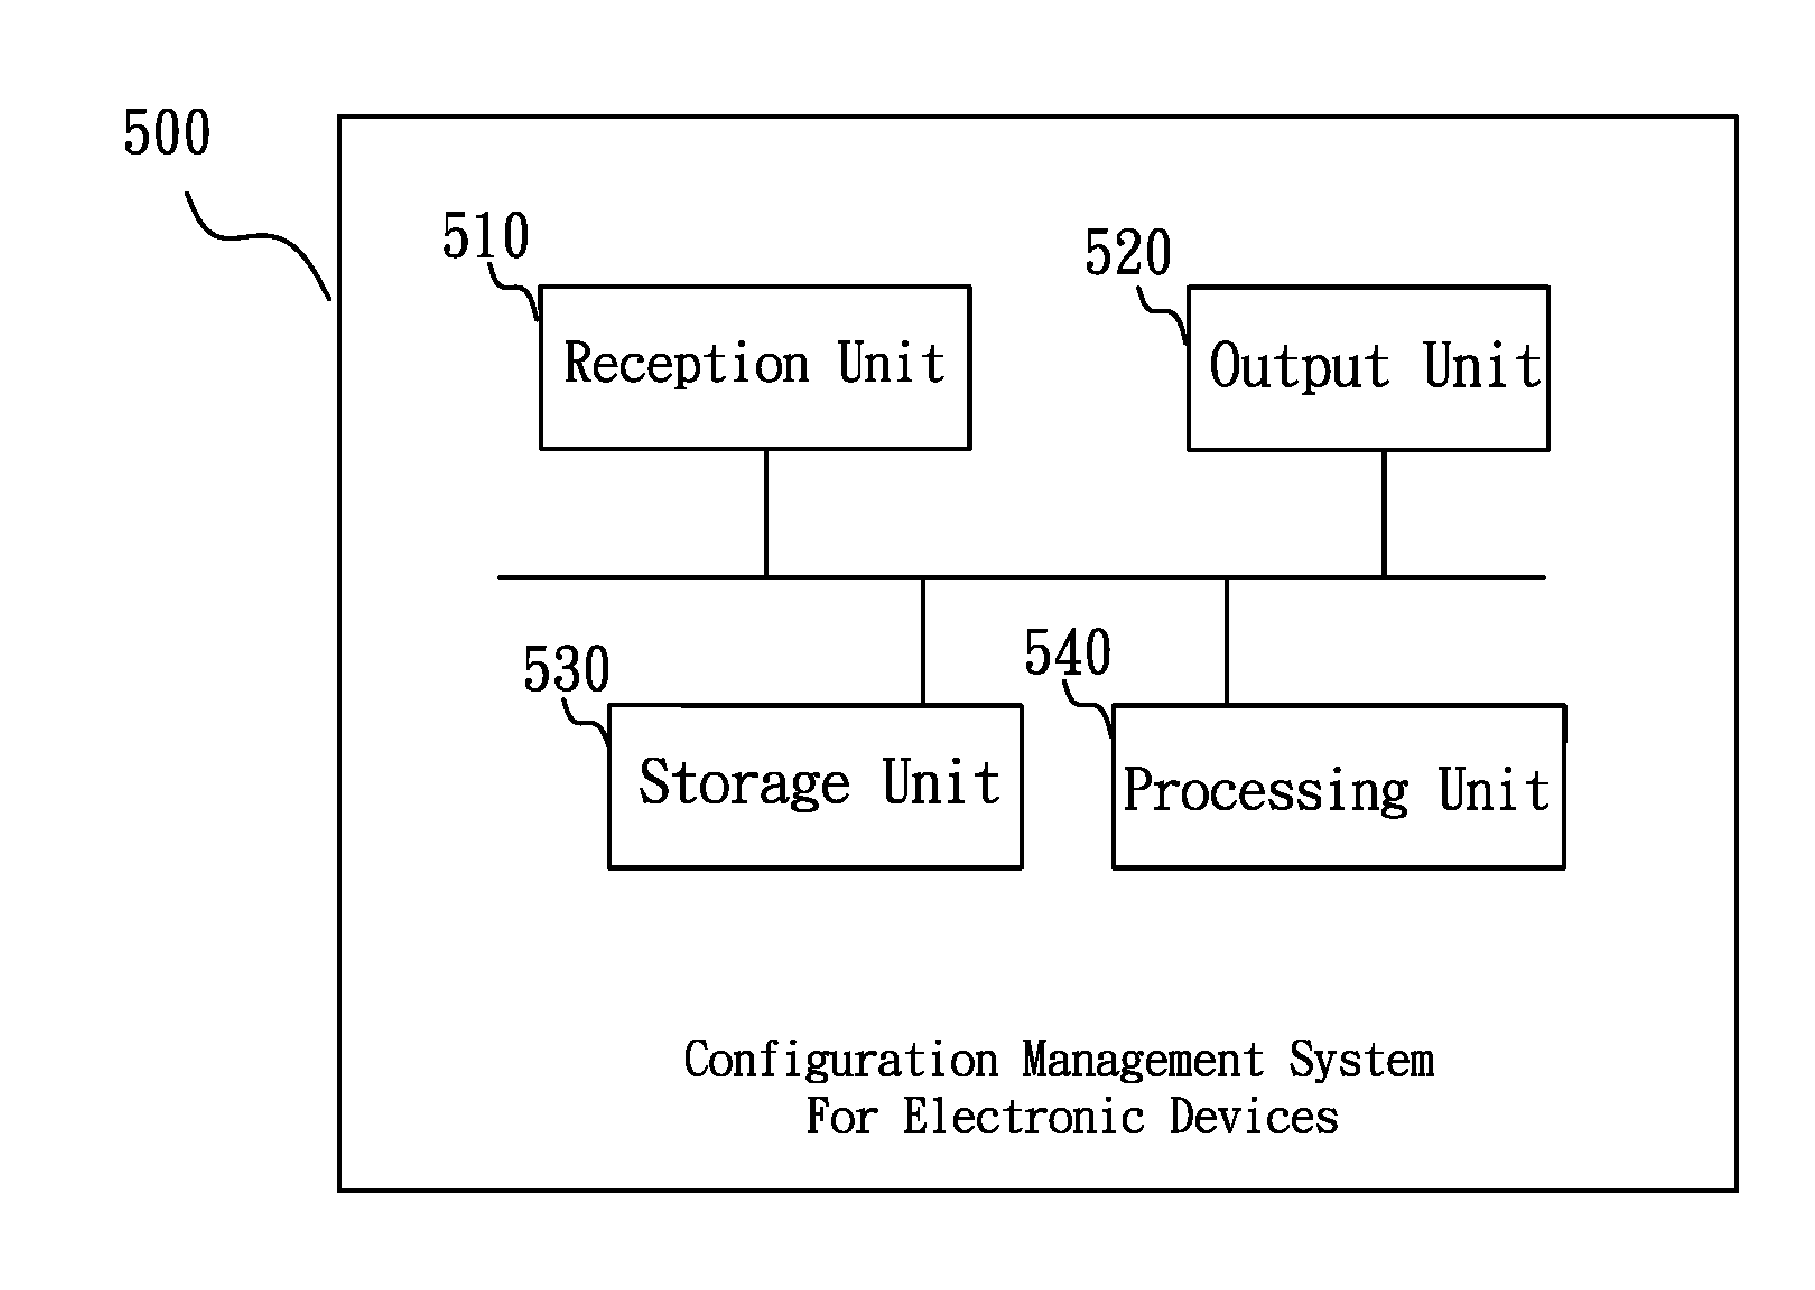 Configuration Management Systems And Methods for Electronic Devices